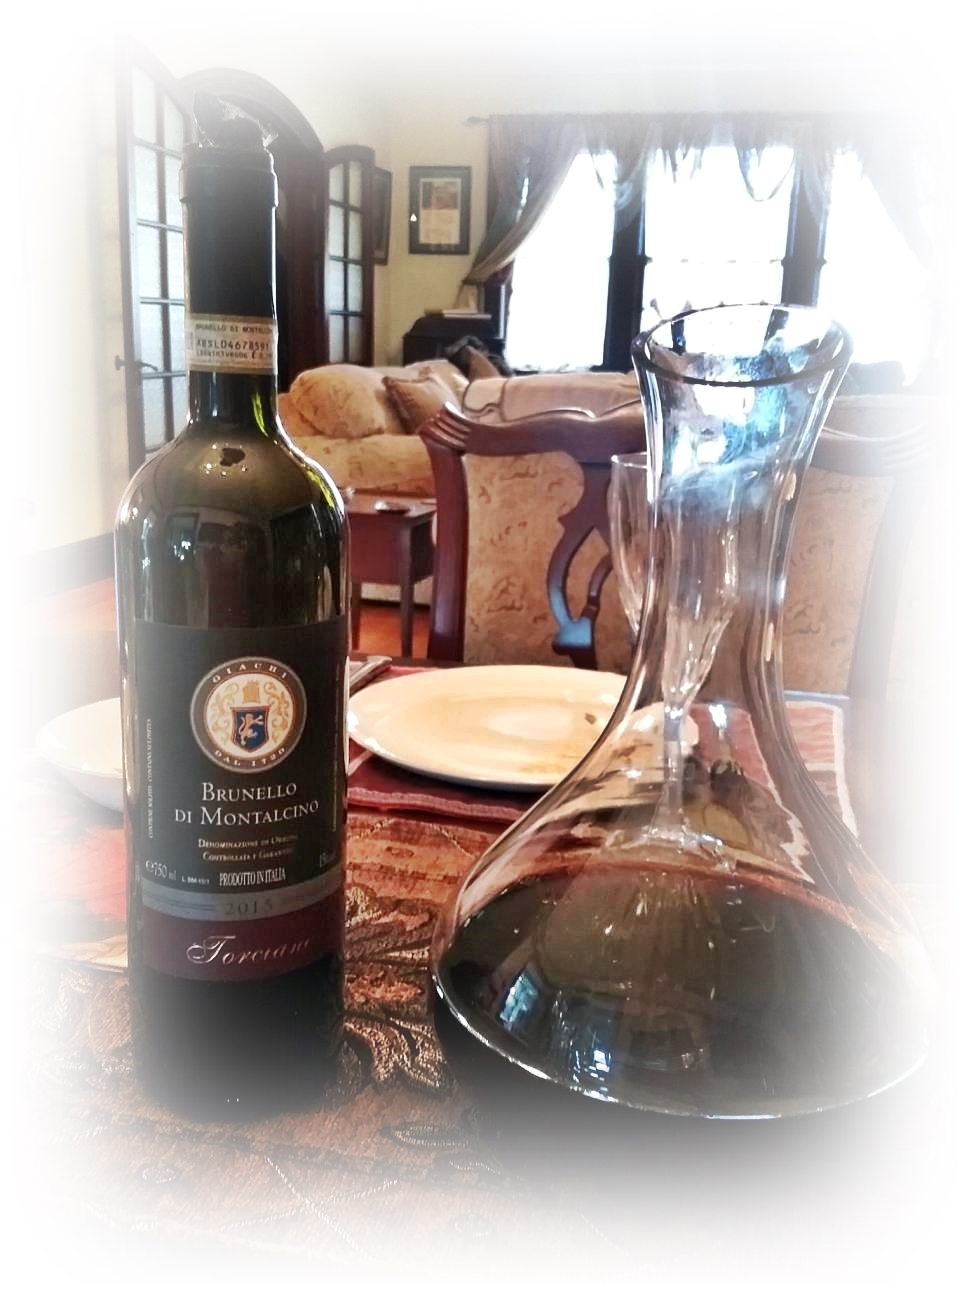 Noble style Brunello di Montalcino red wine ready on the table